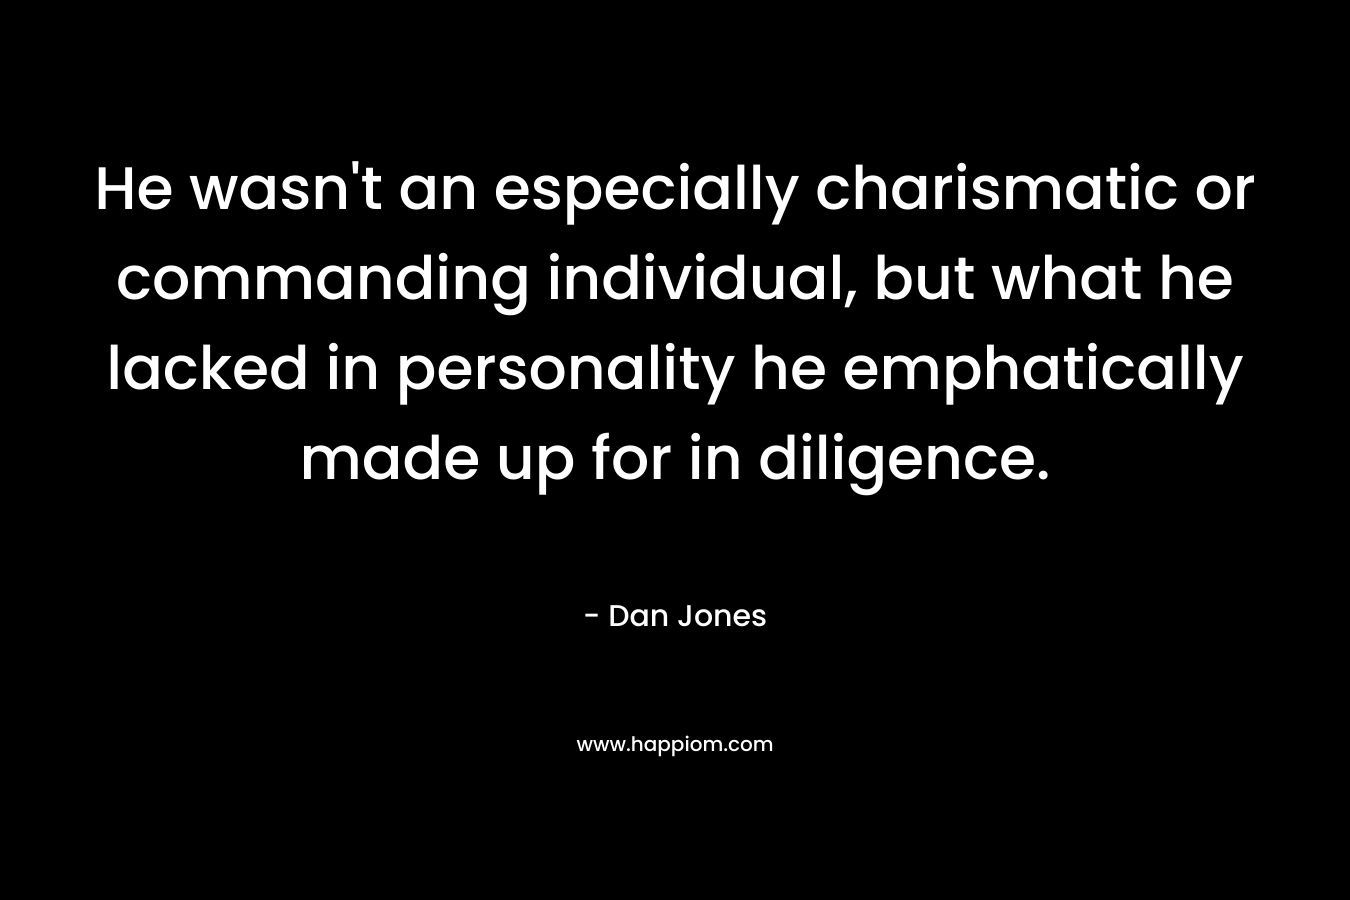 He wasn’t an especially charismatic or commanding individual, but what he lacked in personality he emphatically made up for in diligence. – Dan Jones